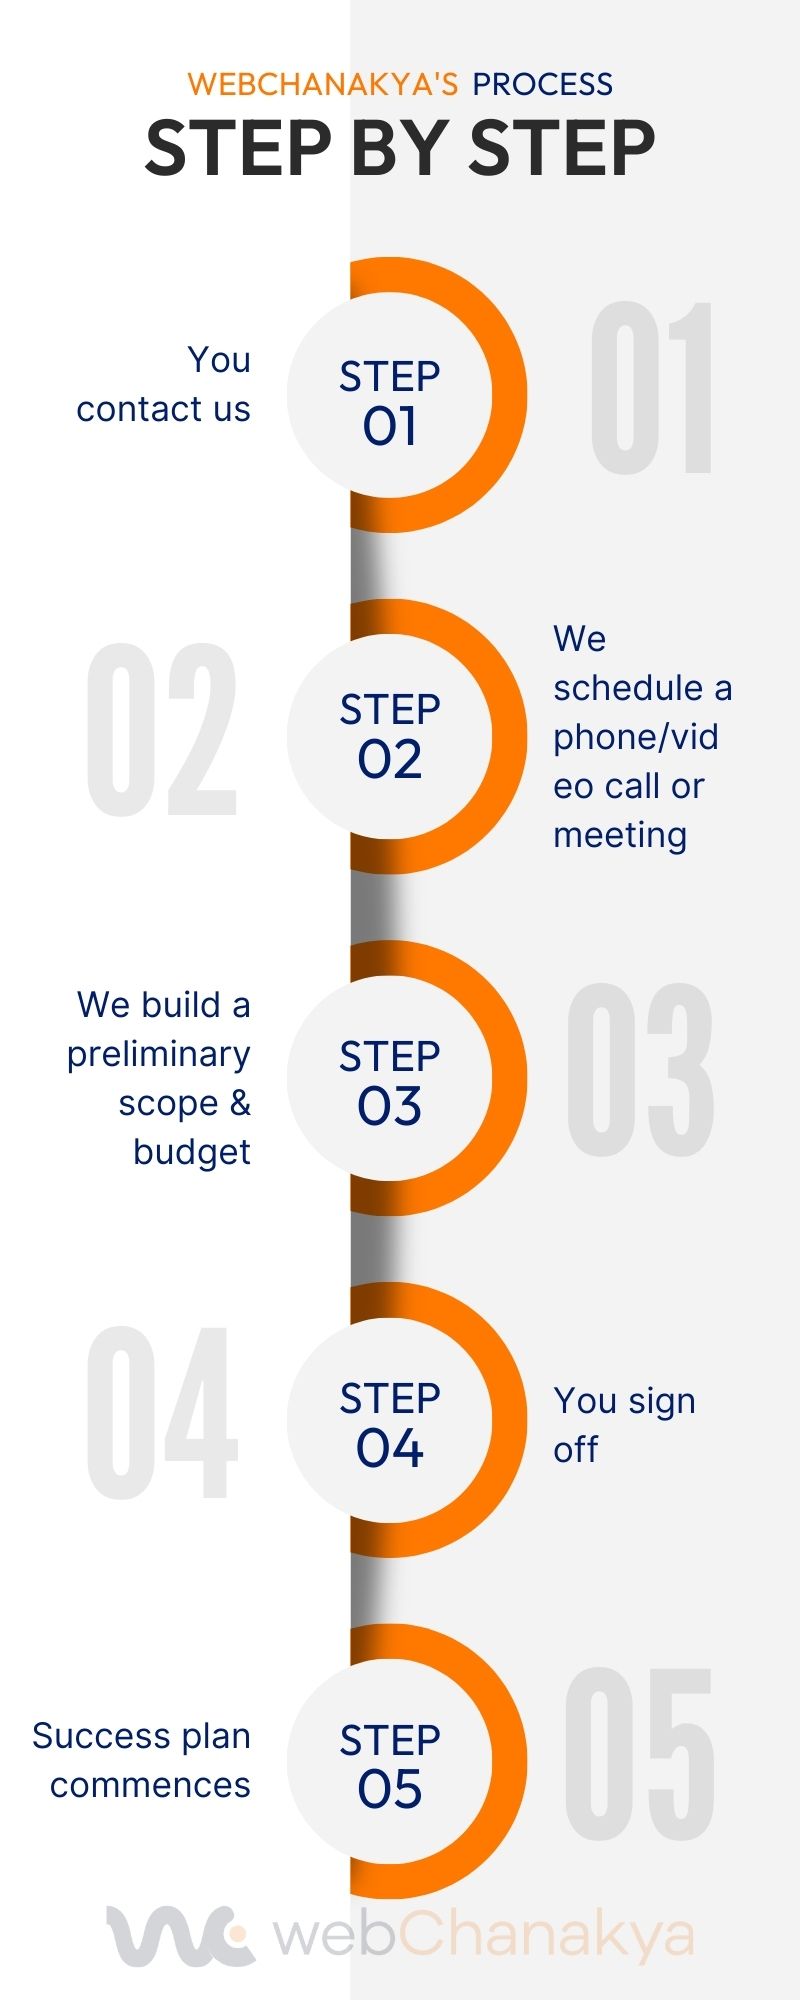 Infographic showing WebChanakya Digital Marketing Agency's process for catering leads and inquiries